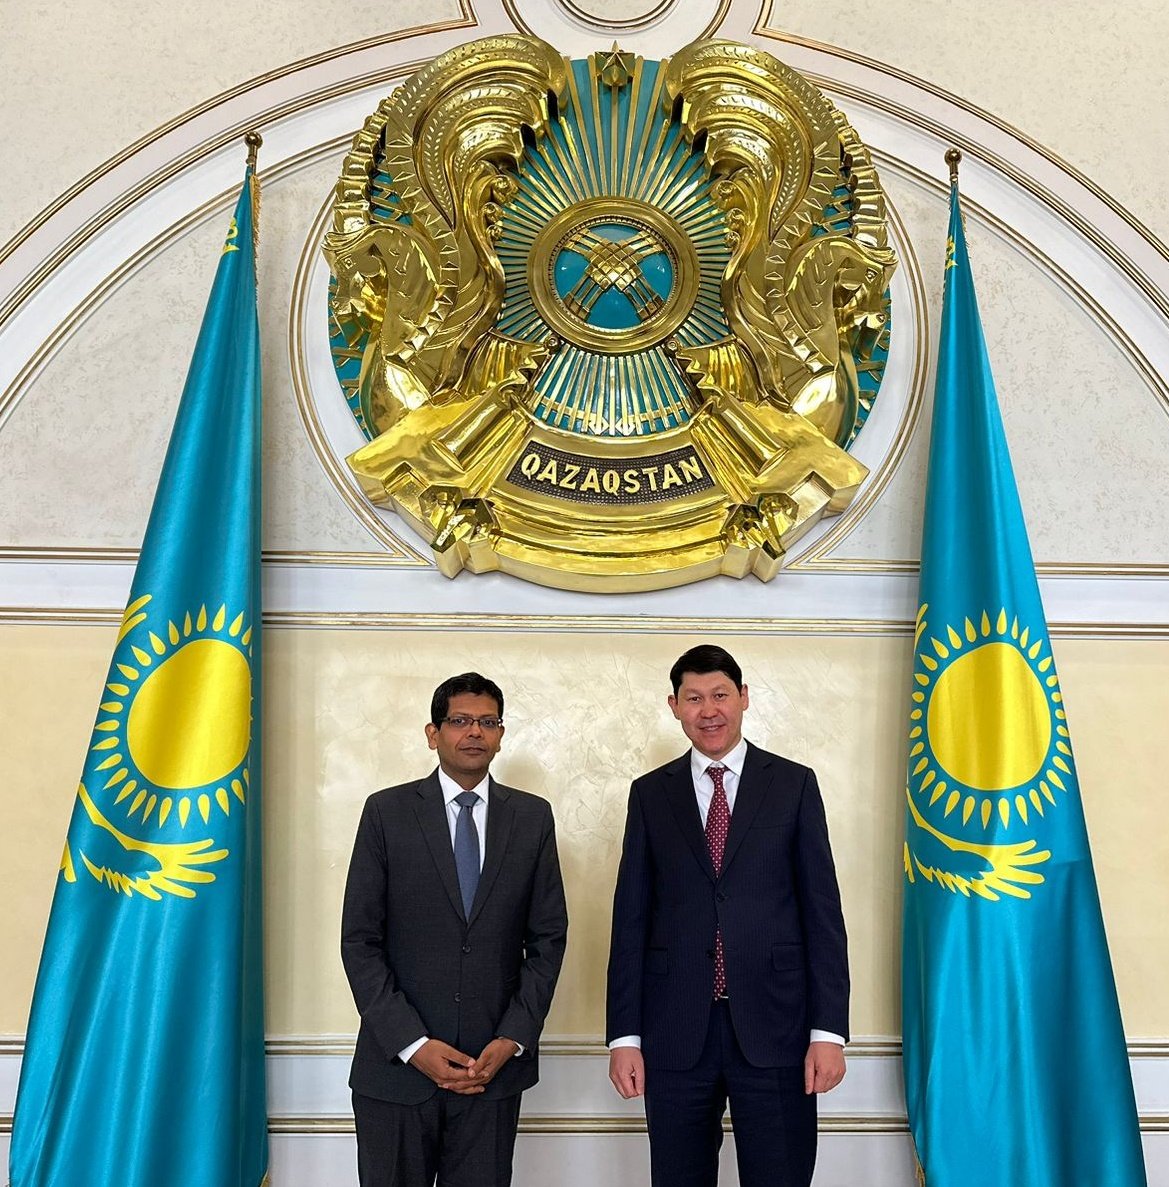 Warm welcome to Mr. Utsav Kumar, @ADB_HQ new Country Director for Kazakhstan.
Over past 30 years 🇰🇿 & #ADB partnered together on numerous projects that contributed to the econ. devel-t & improved quality of life in 🇰🇿
Confident that our cooperation with ADB will thrive further.